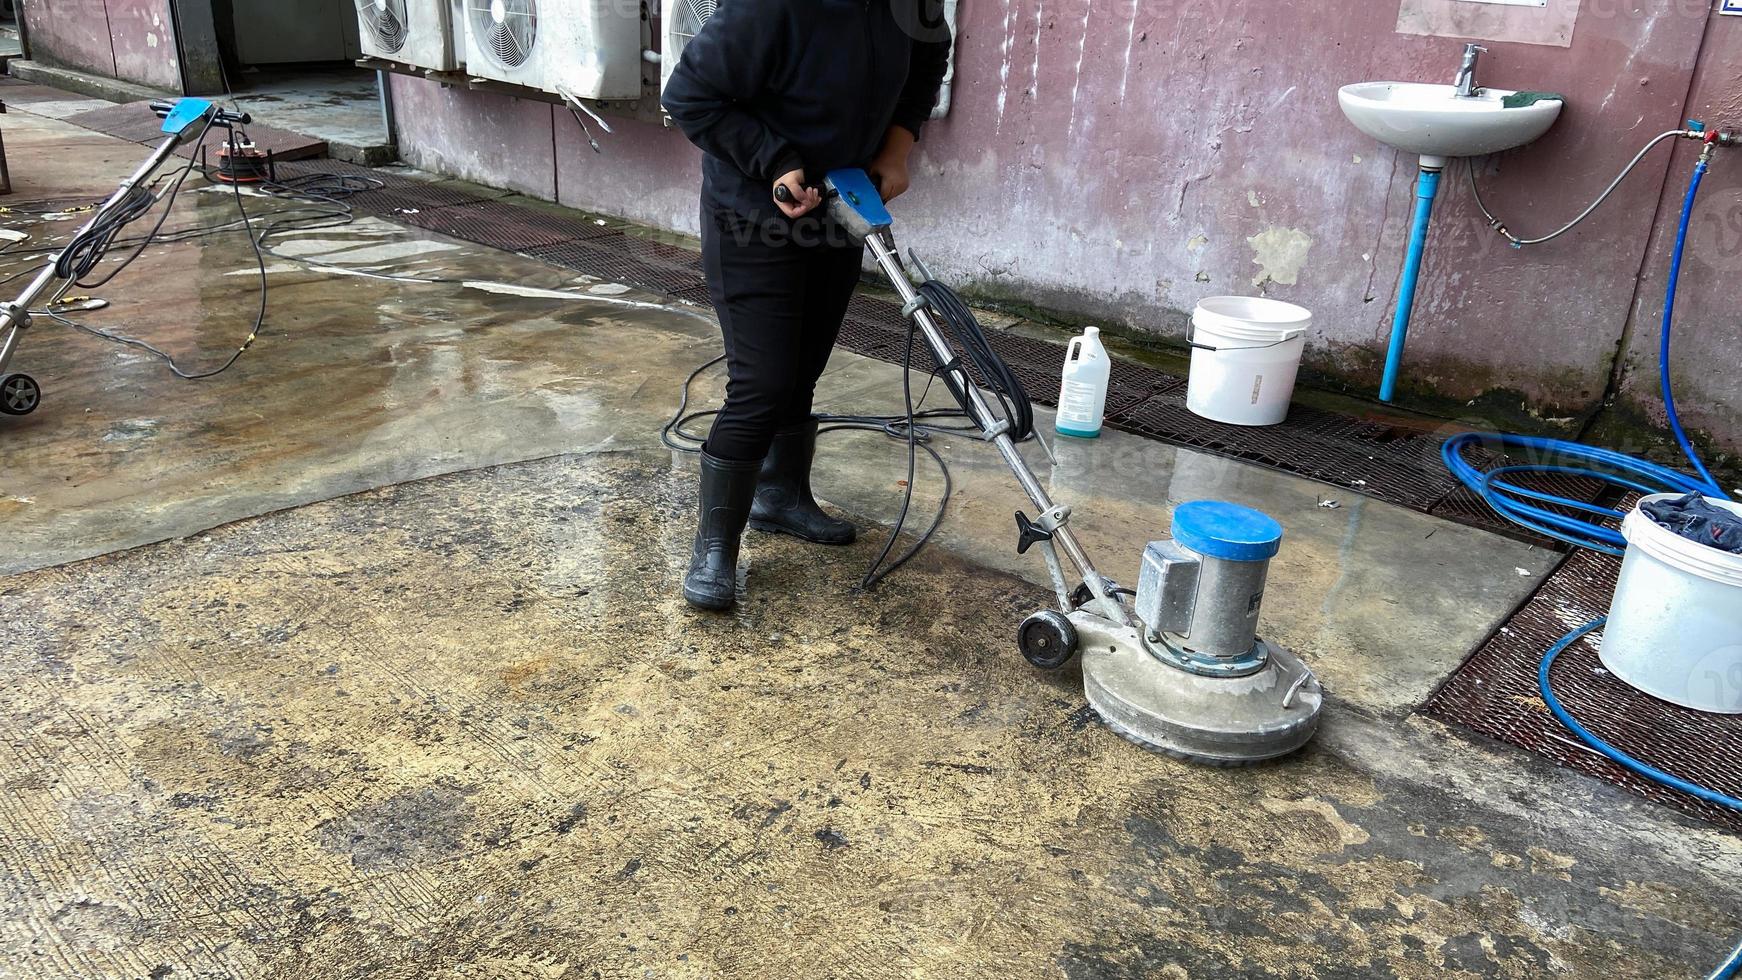 Employees use a concrete floor scrubber in the office parking lot. home or hotel Clean the exterior floor with a scrubber and chemical solution. commercial business services photo